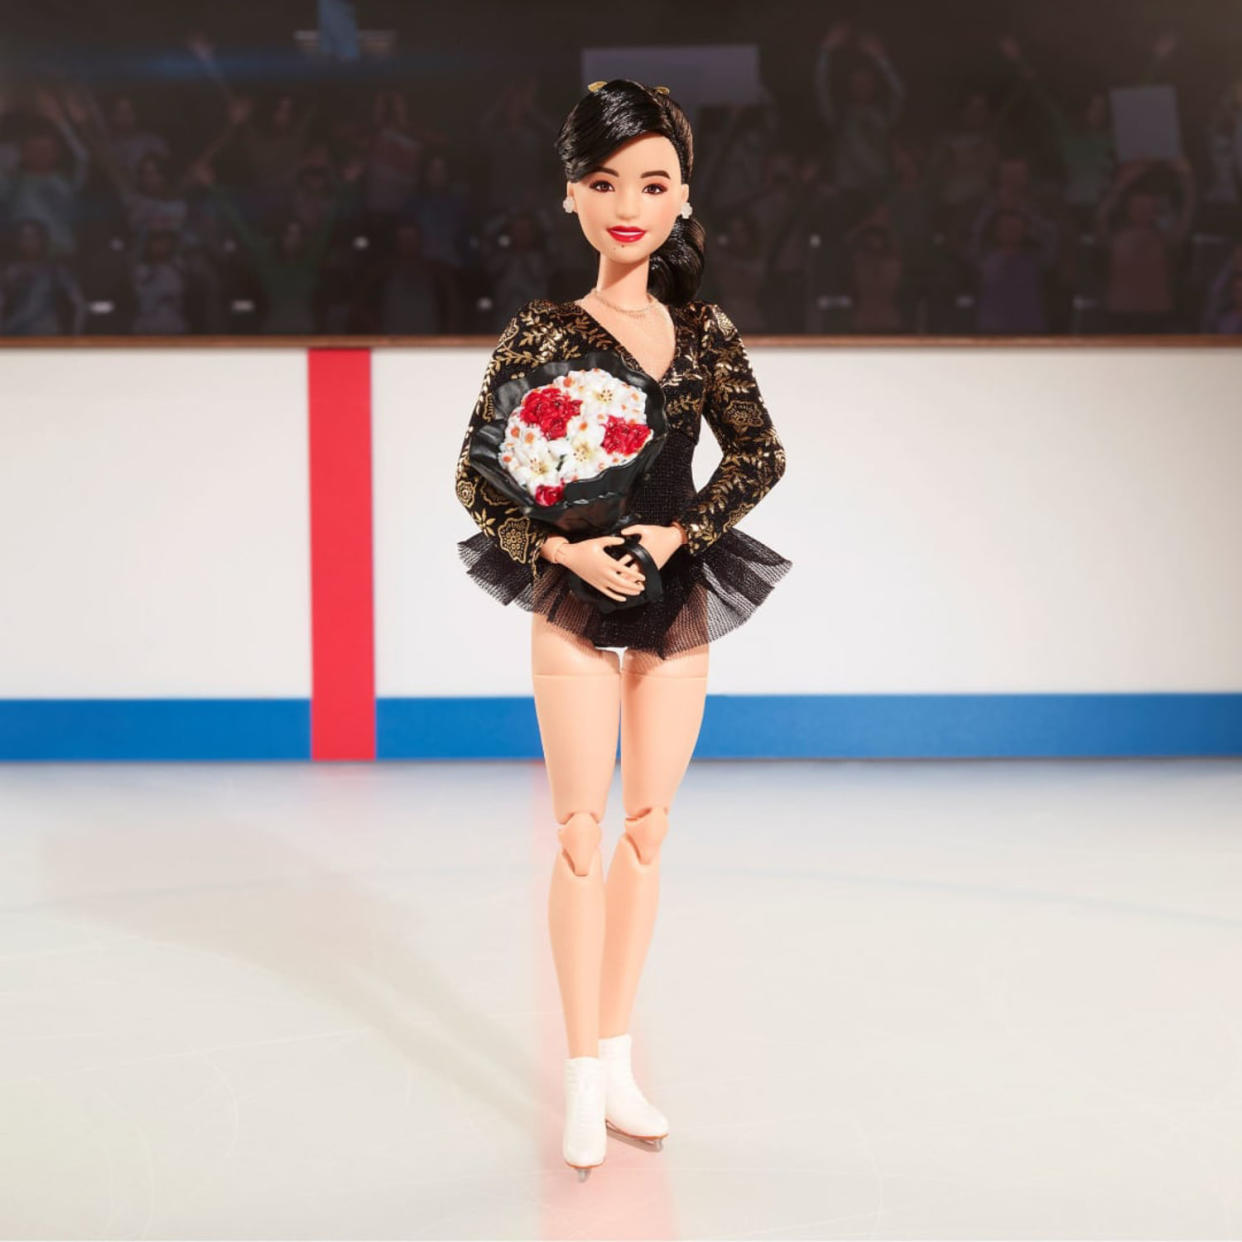 The Barbie doll sparkles in a black leotard with shimmering golden accents in a reproduction of the costume she wore when she won gold at the 1992 Winter Games, designed by Lauren Sheehan. (Mattel)